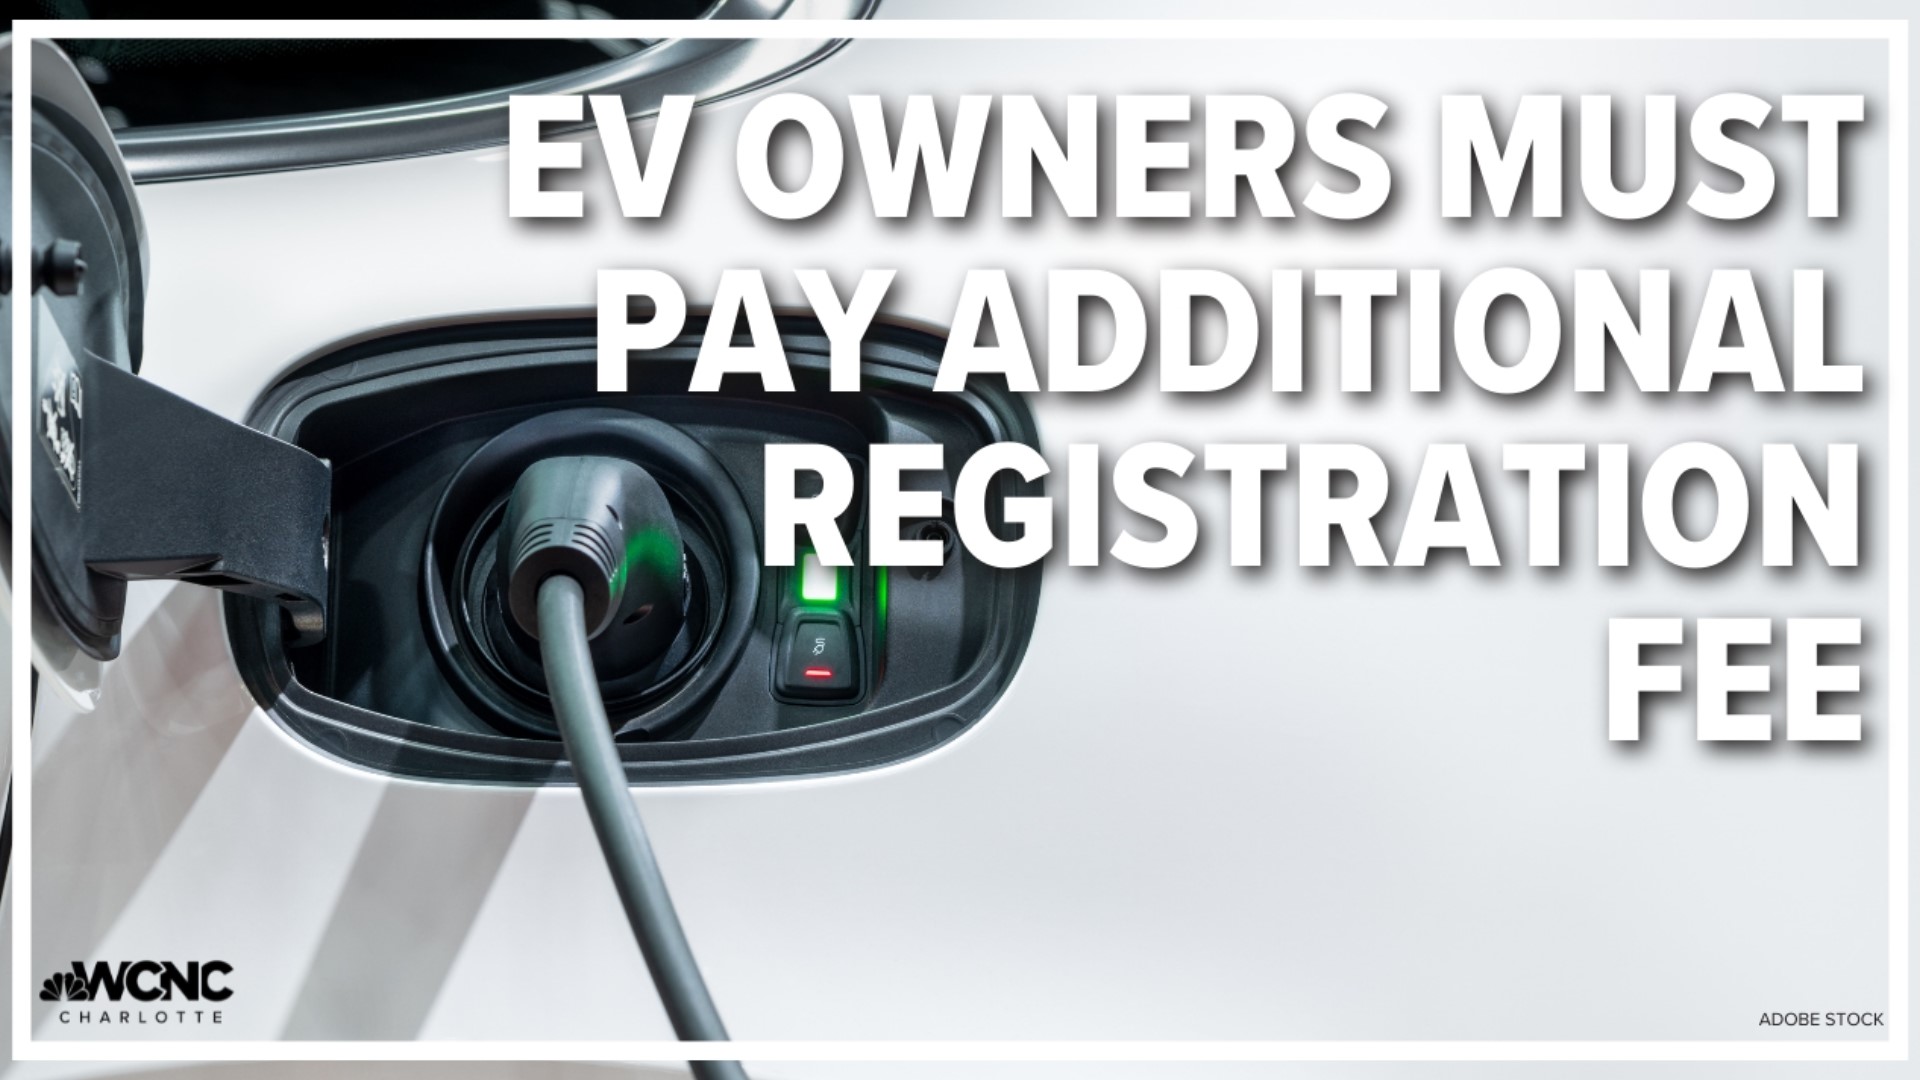 North Carolina state law requires EV owners to pay an additional $140 vehicle registration fee.